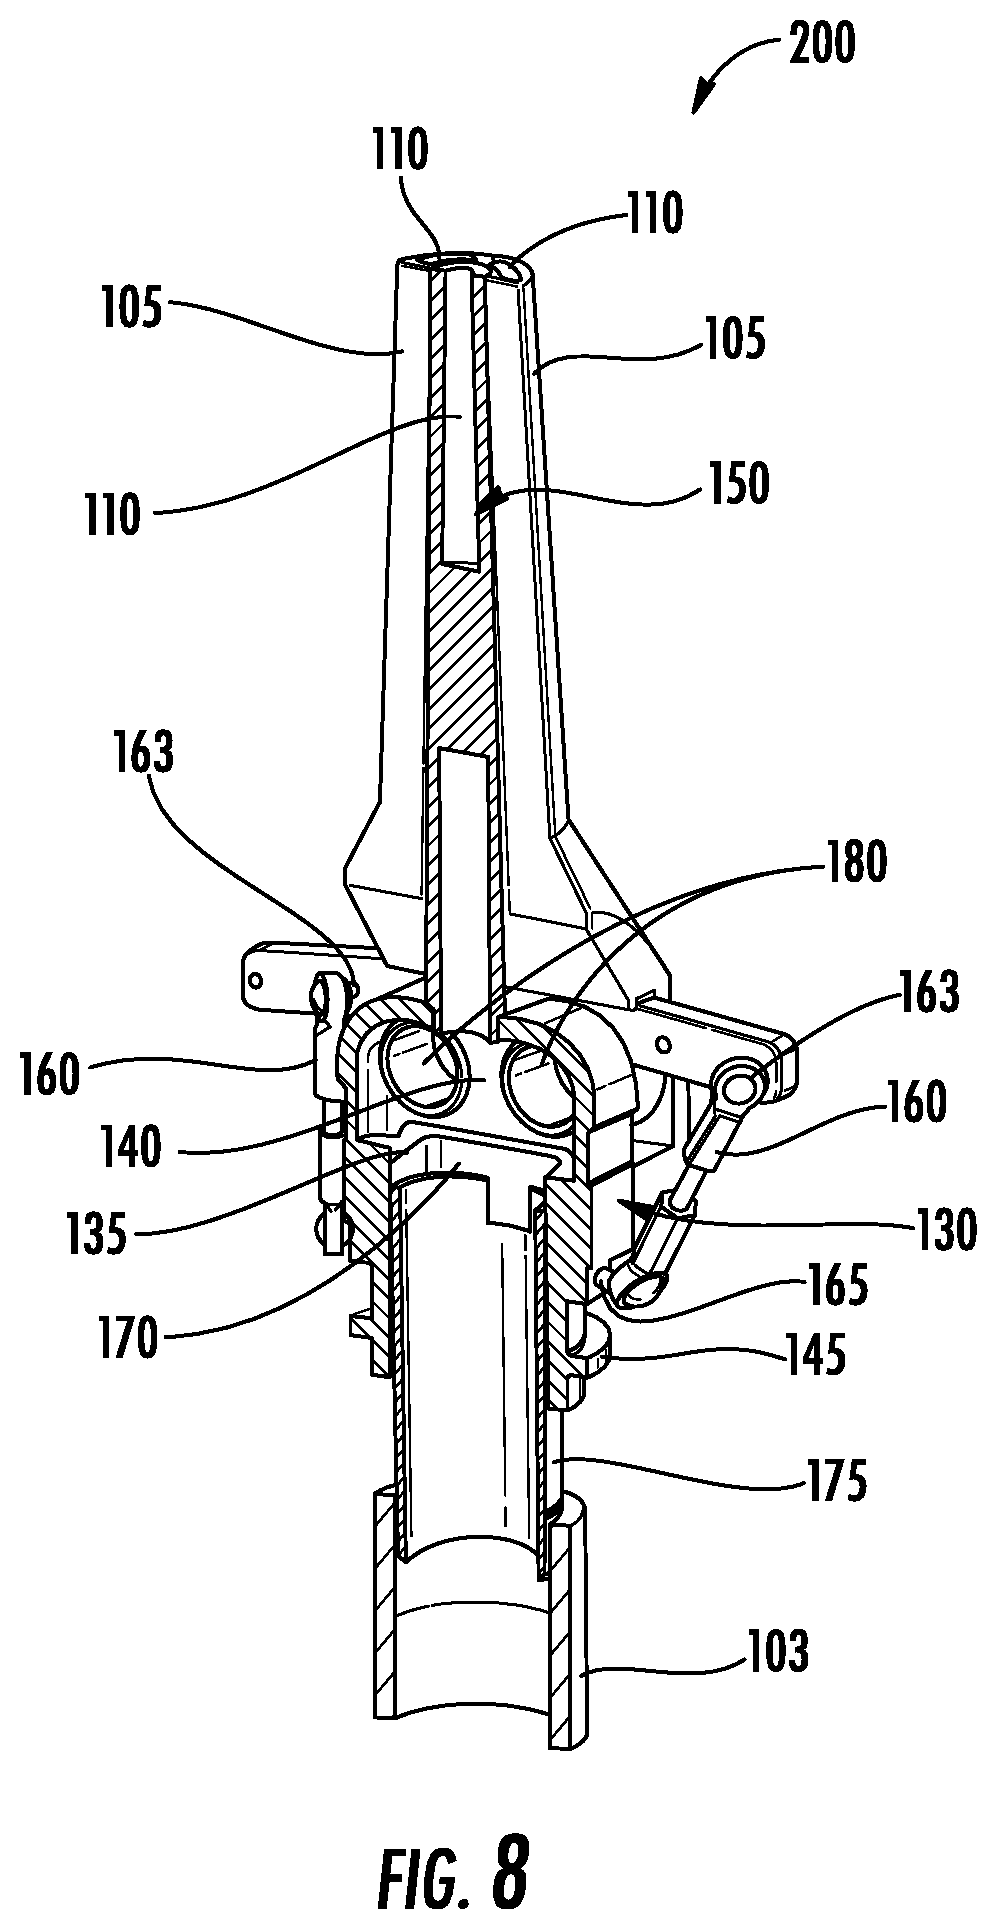 Nozzle assembly with articulating nozzles